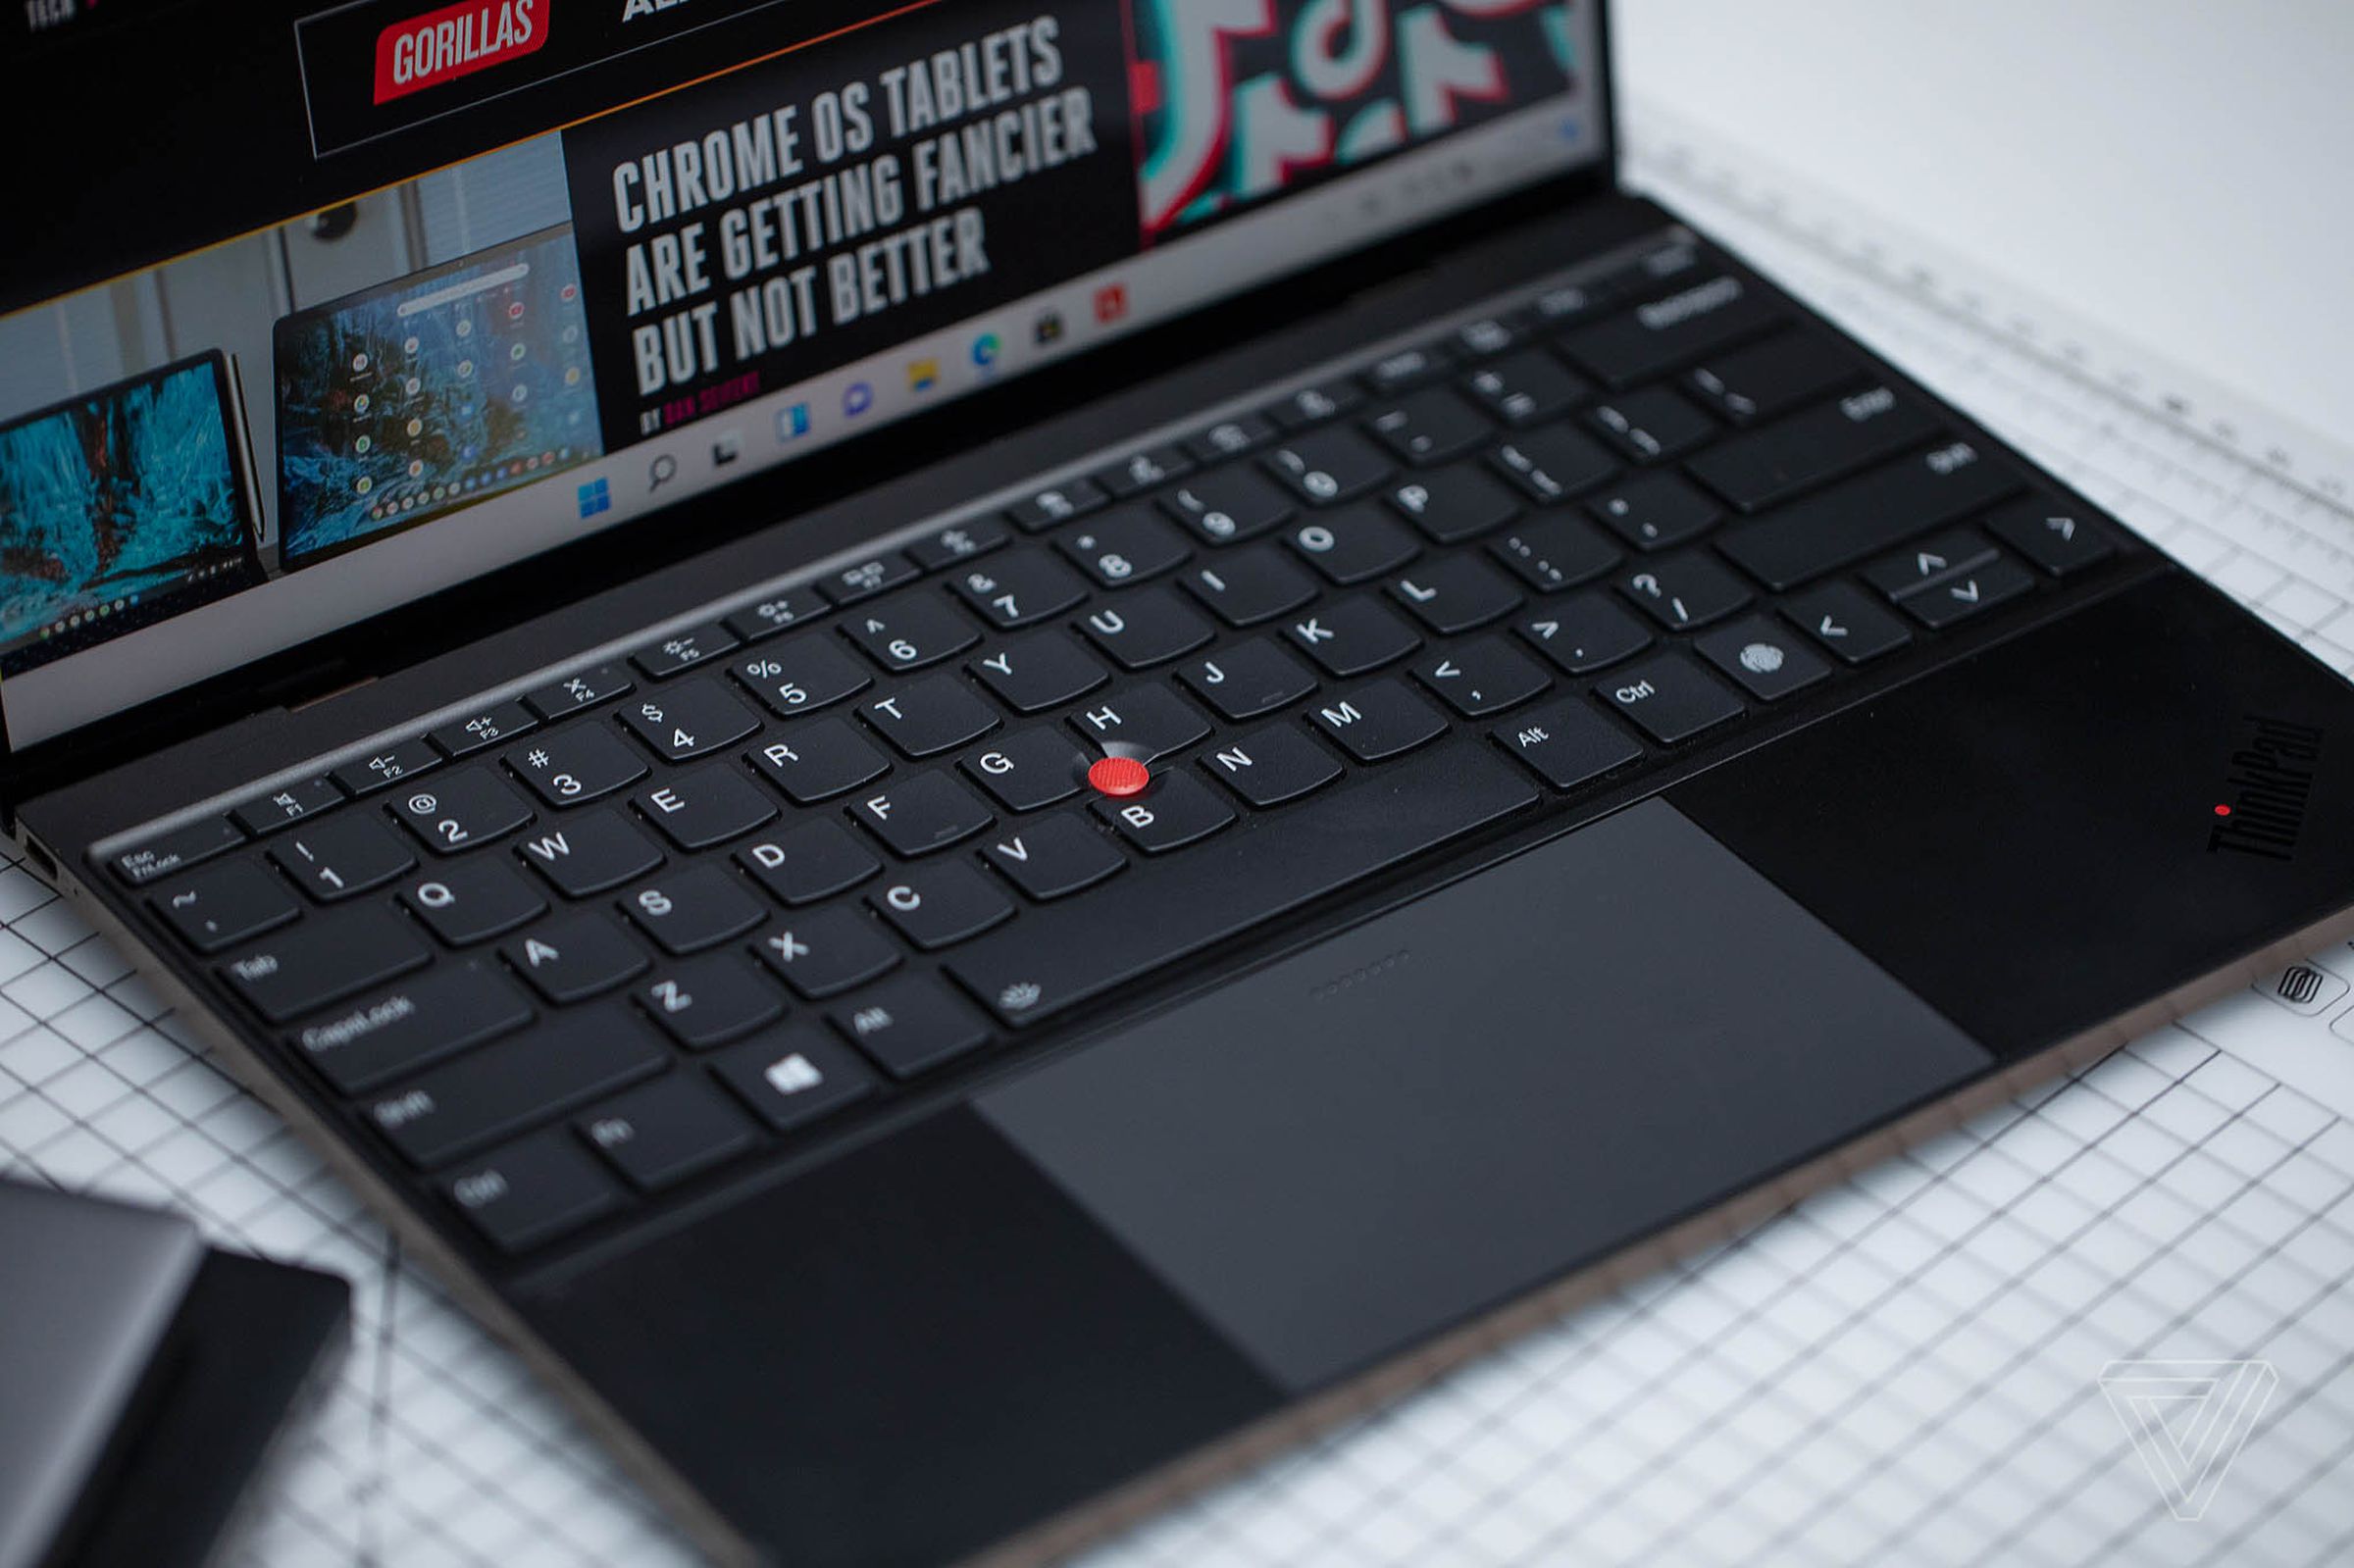 The ThinkPad Z13 keyboard seen from above and to the left. The screen displays The Verge homepage.